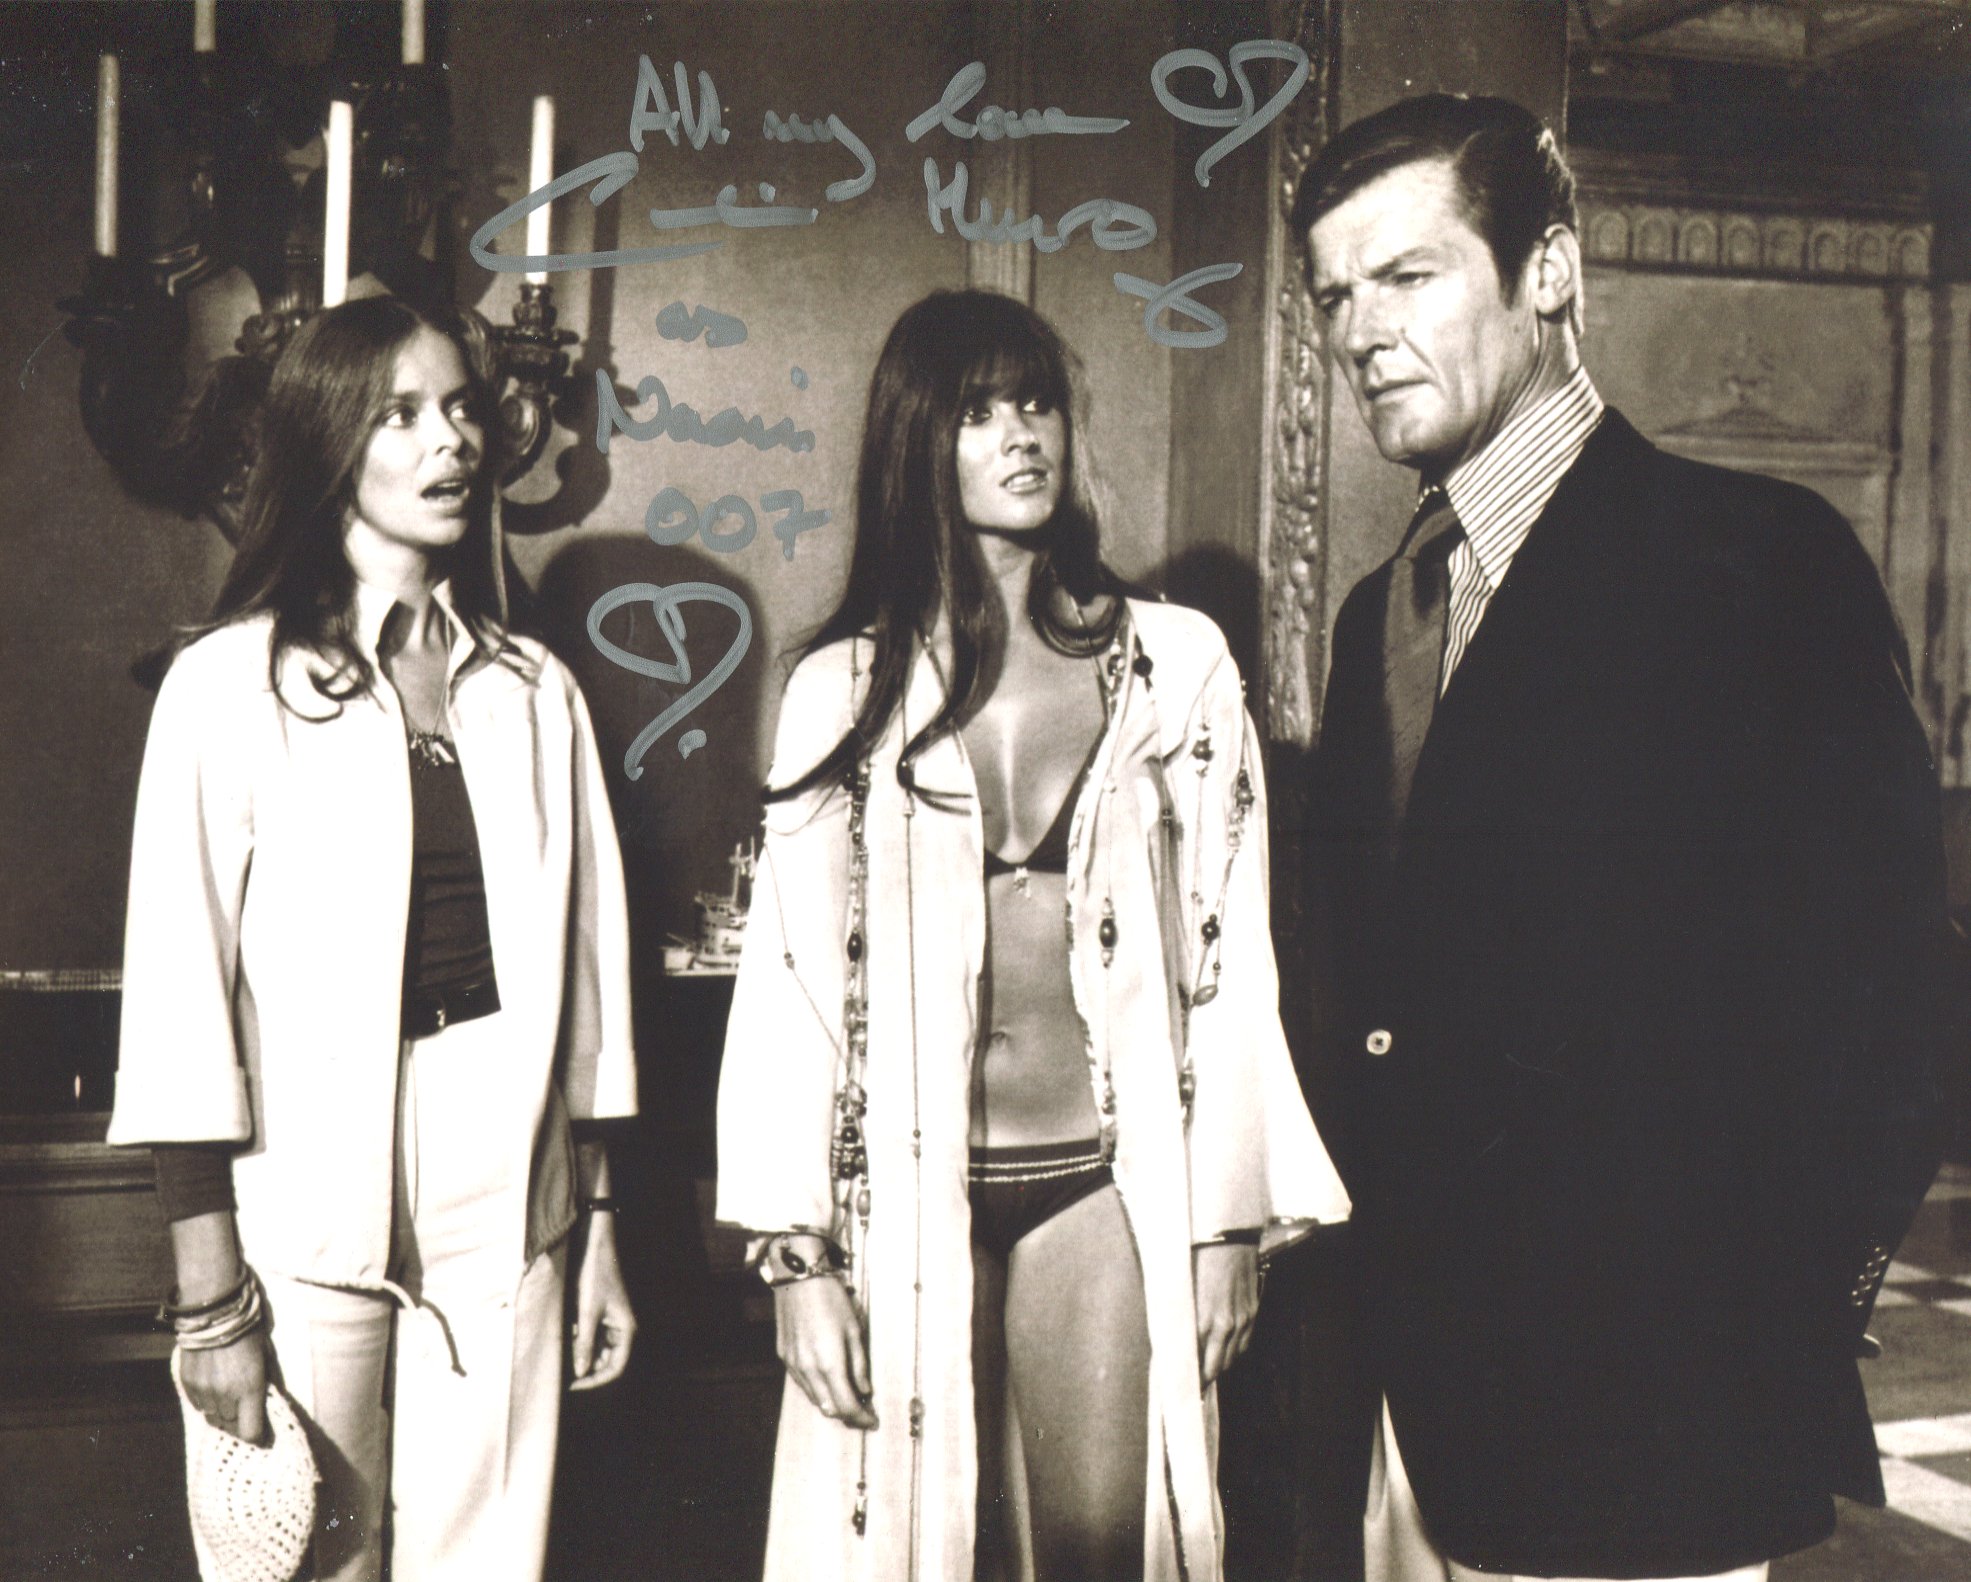 007 Bond girl Caroline Munro signed 8x10 The Spy Who Loved Me photo. Good condition. All